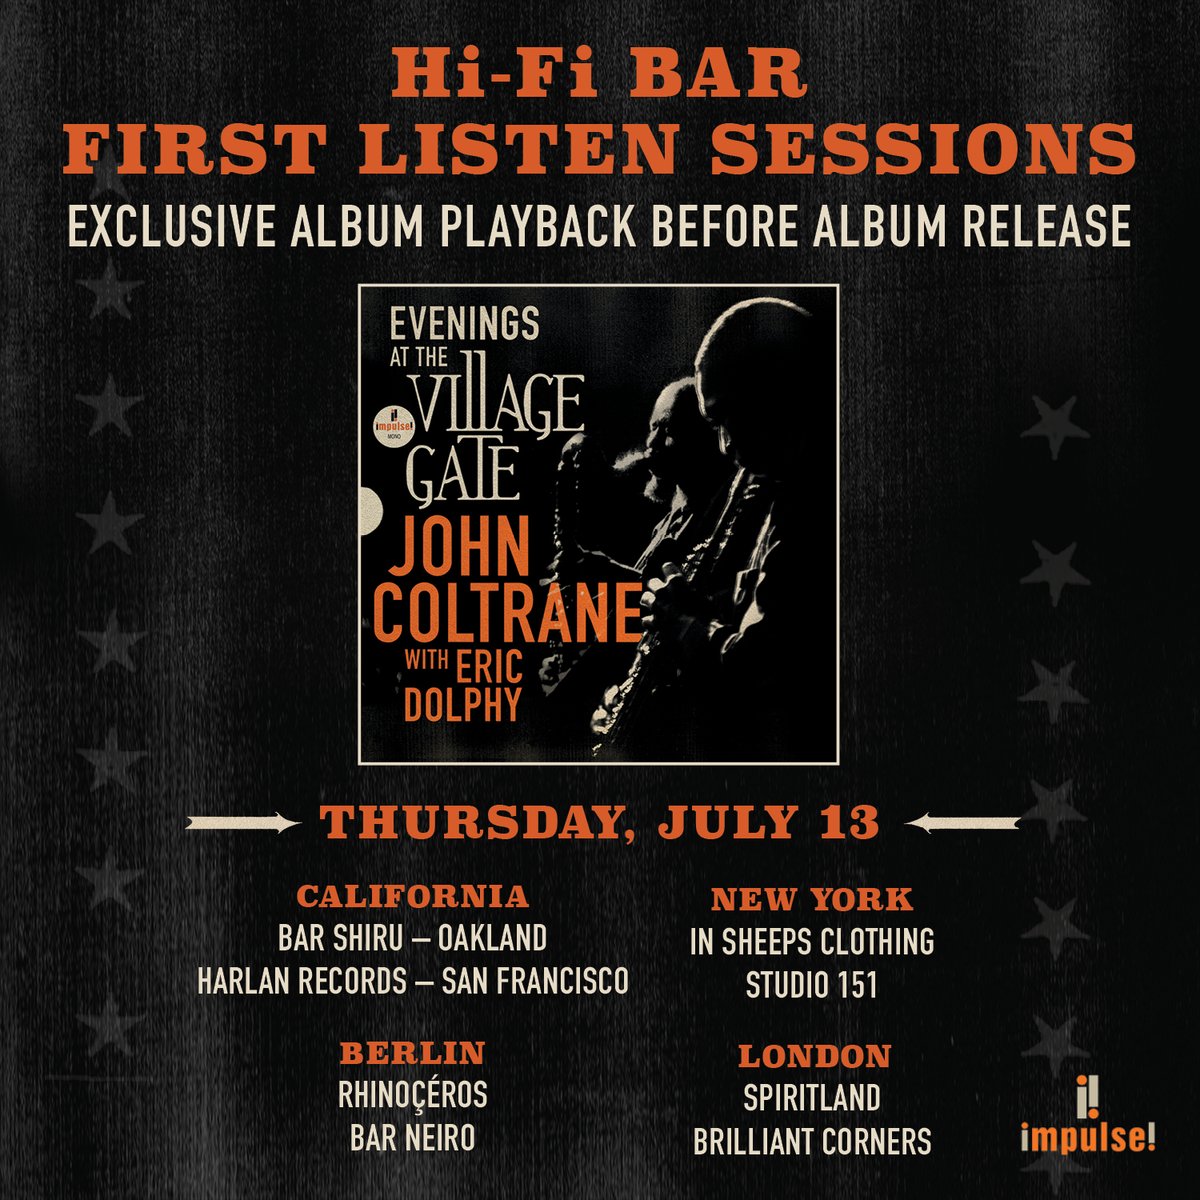 This Thursday, July 13 – get an exclusive first listen to “Evenings at the Village Gate: @JohnColtrane with Eric Dolphy” at participating Hi-Fi Bars, globally. Check location socials for timing and other event details.